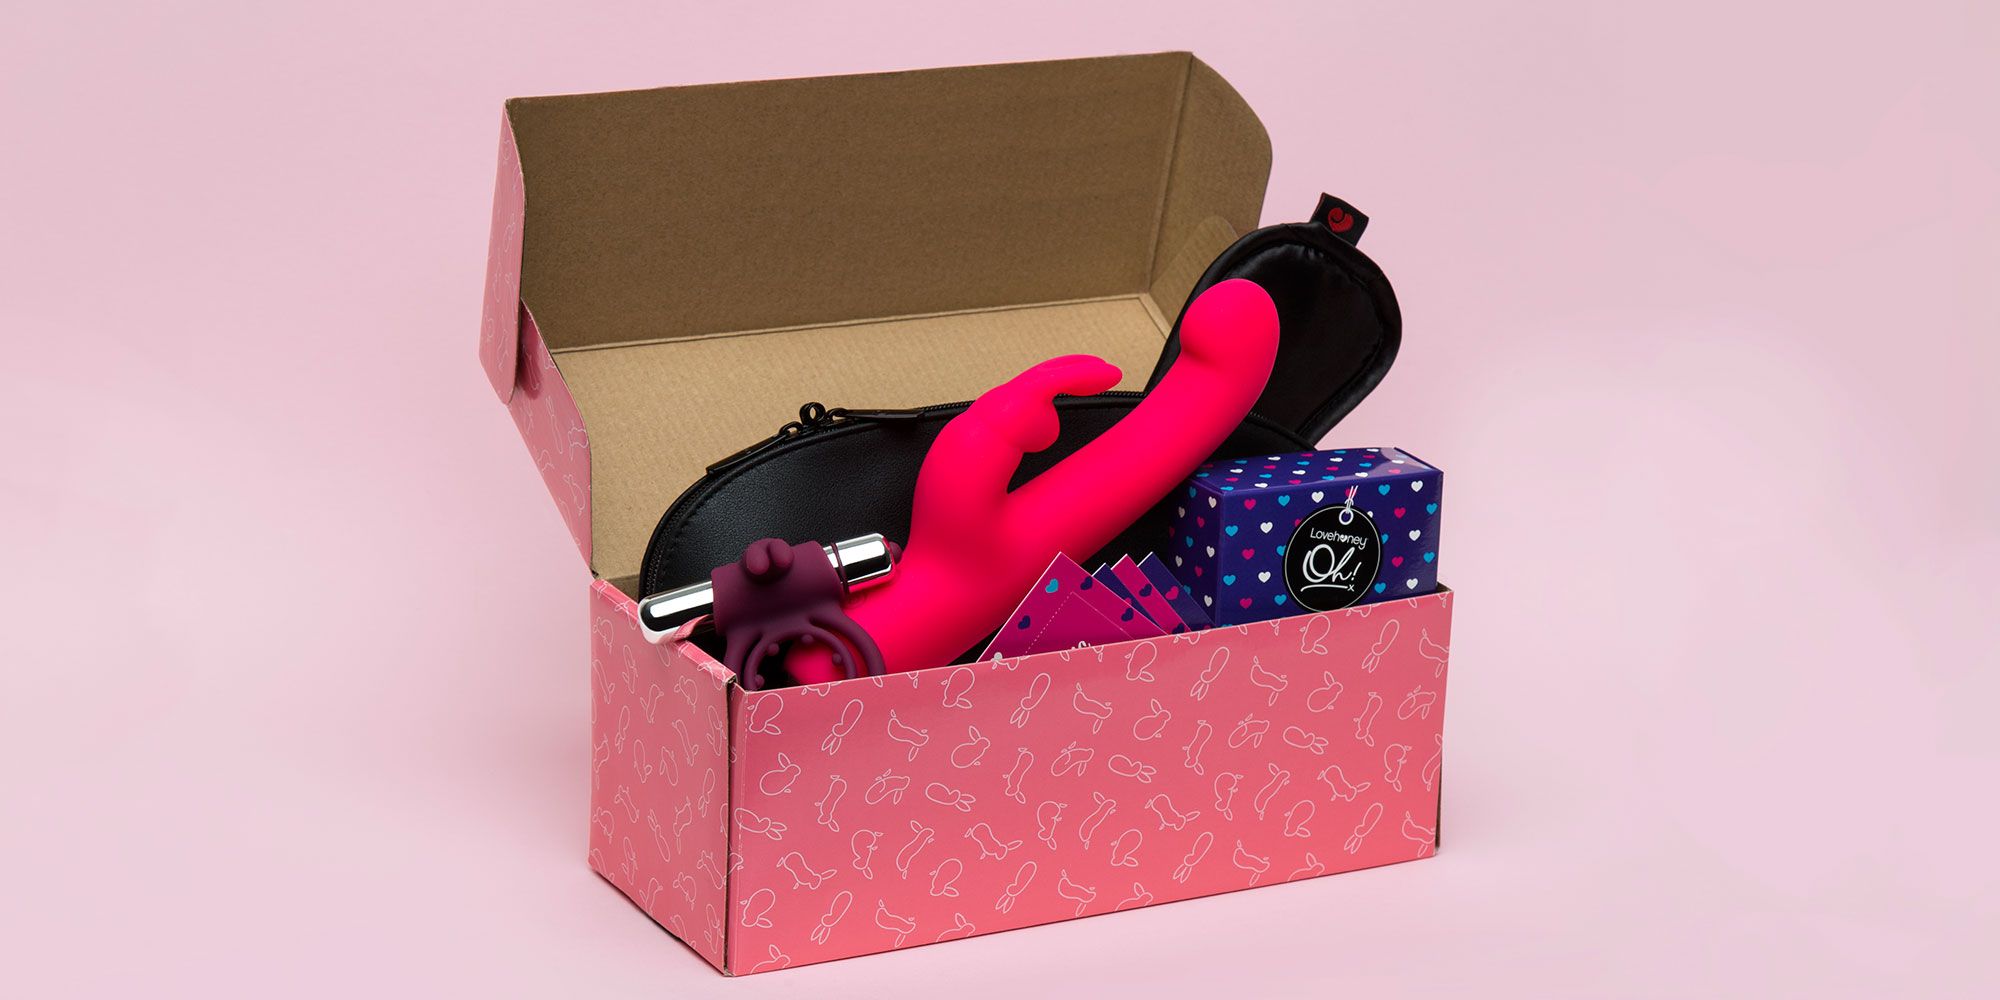 Sex toy subscription boxes from Lovehoney are now a thing.